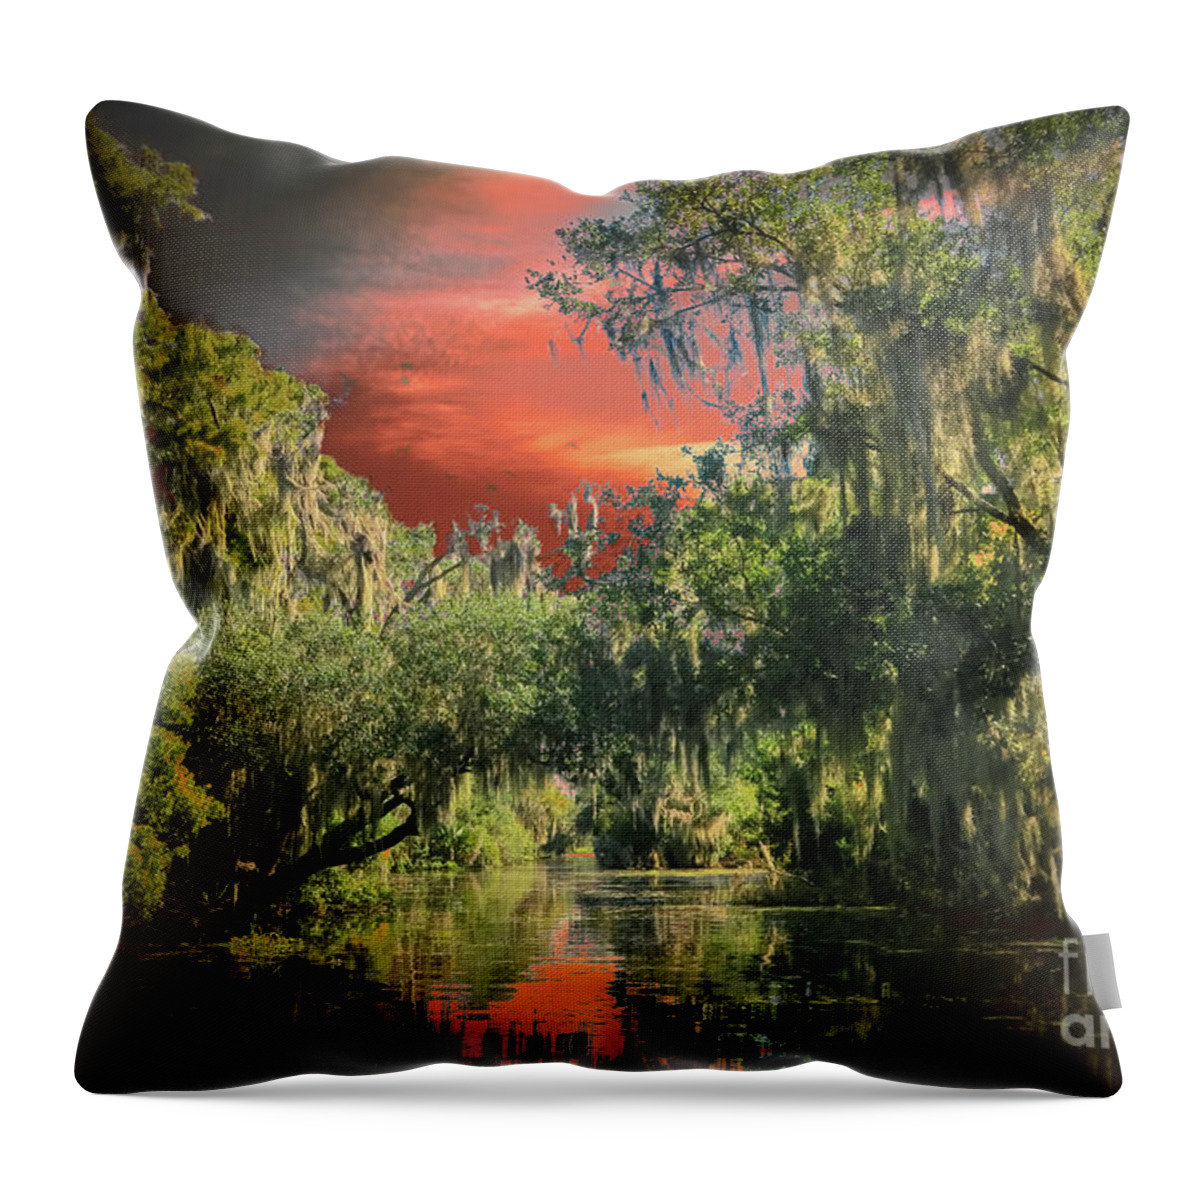 Louisiana Swamp Throw Pillow featuring the photograph Swamp 1 by Larry White